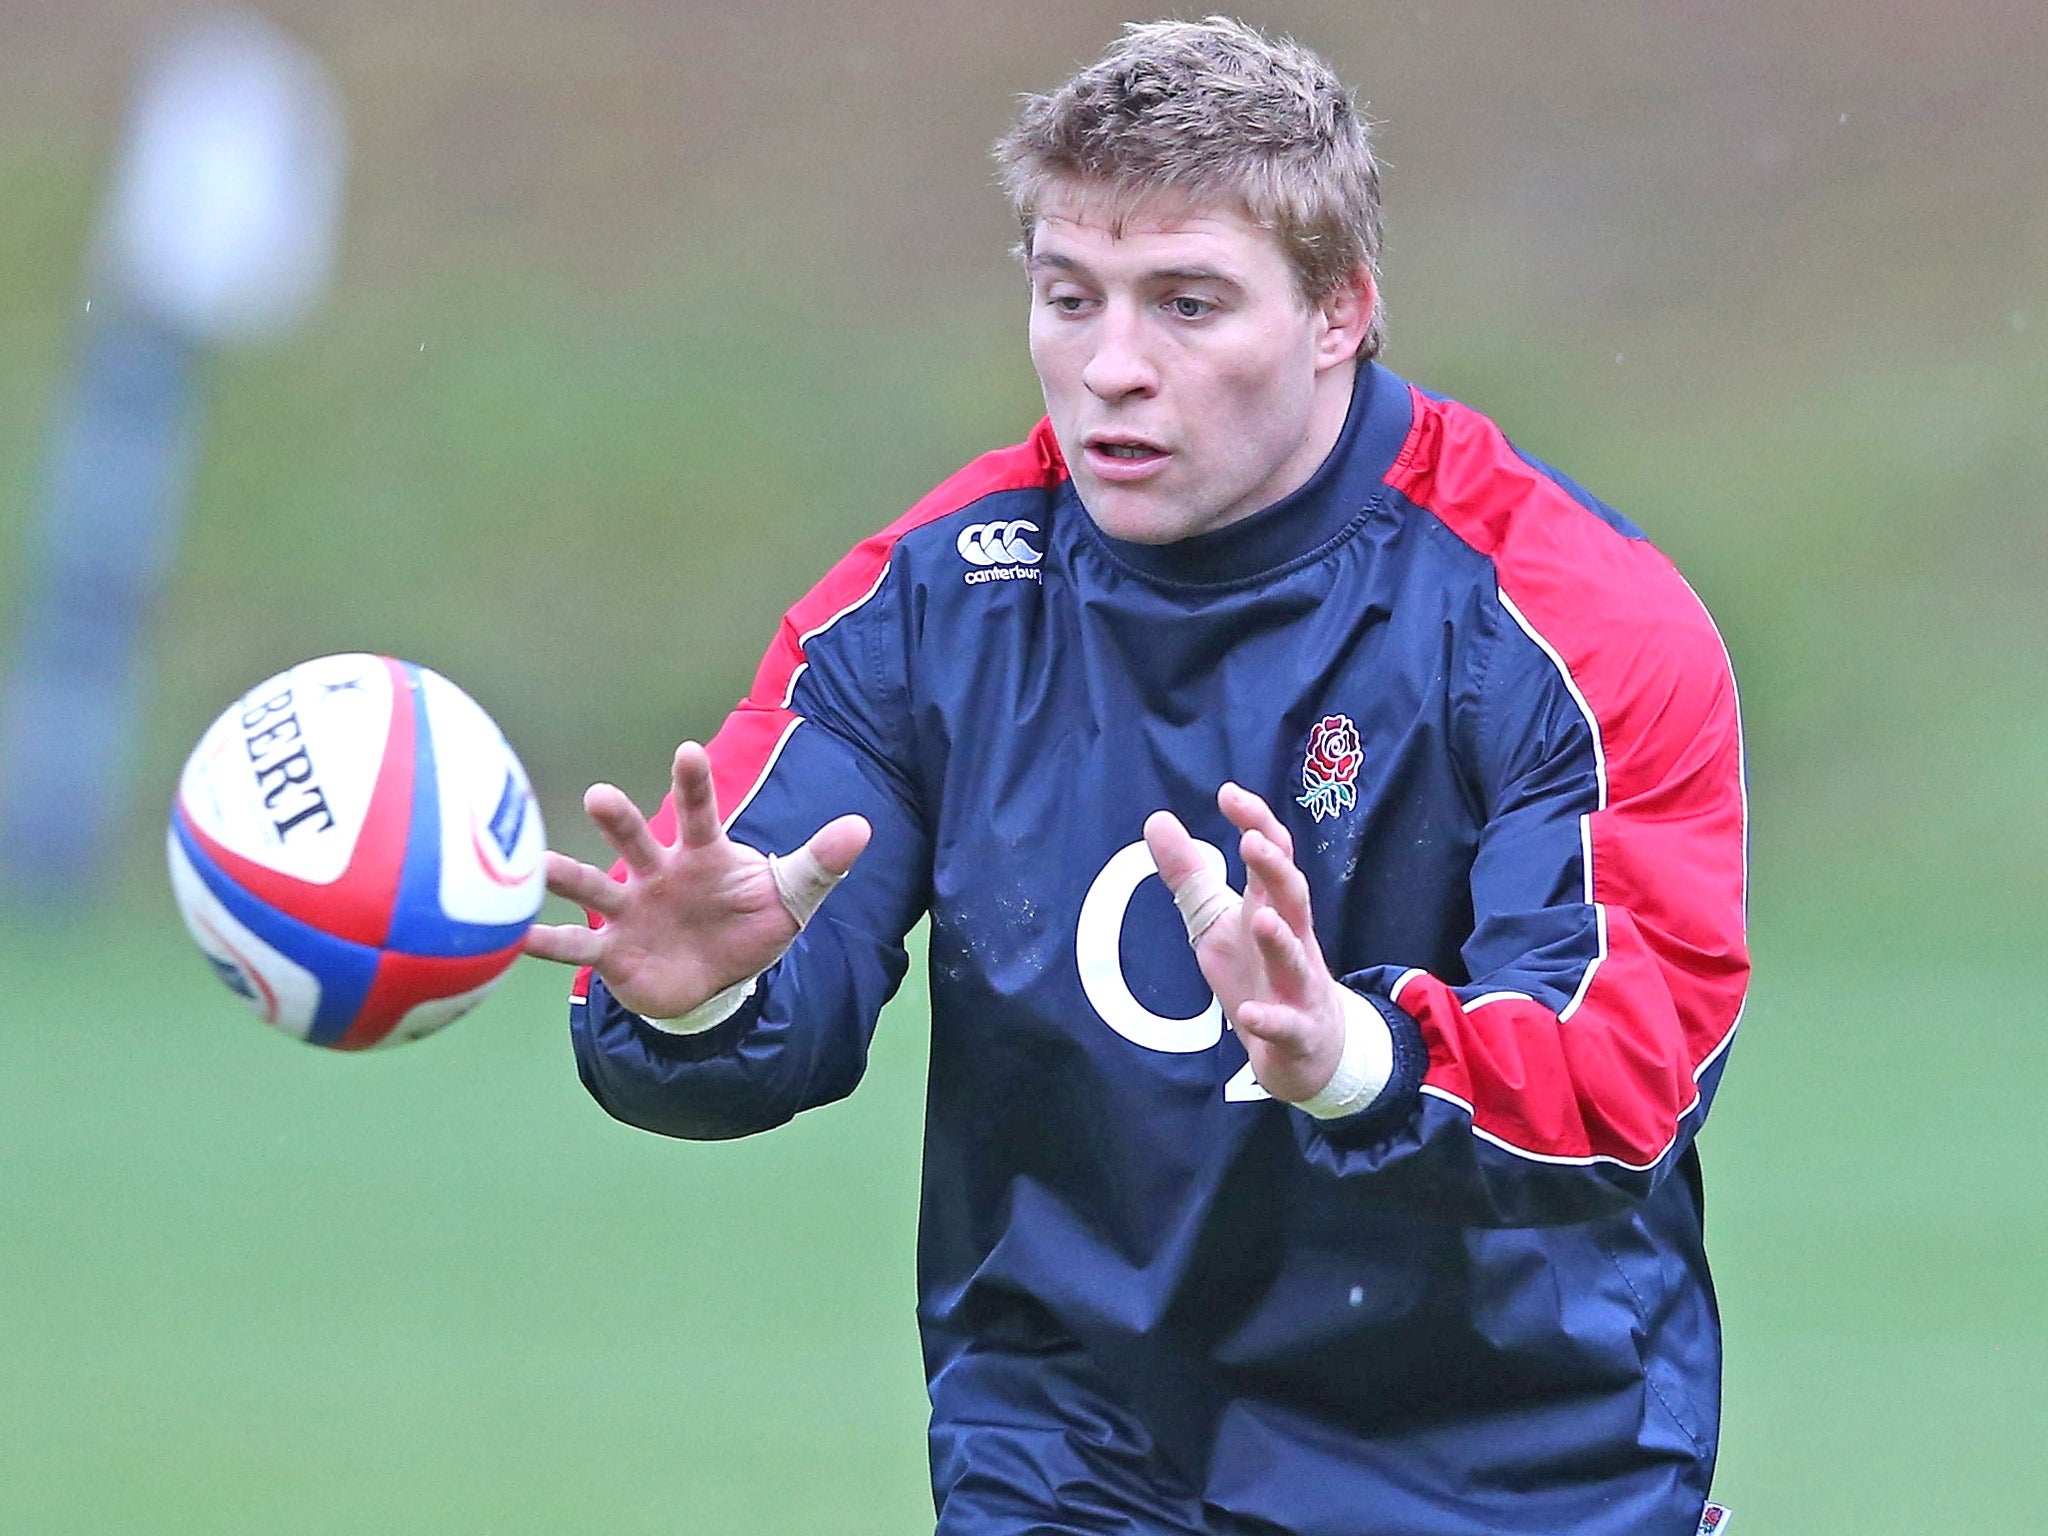 Tom Youngs catches the ball during an England training session on Monday